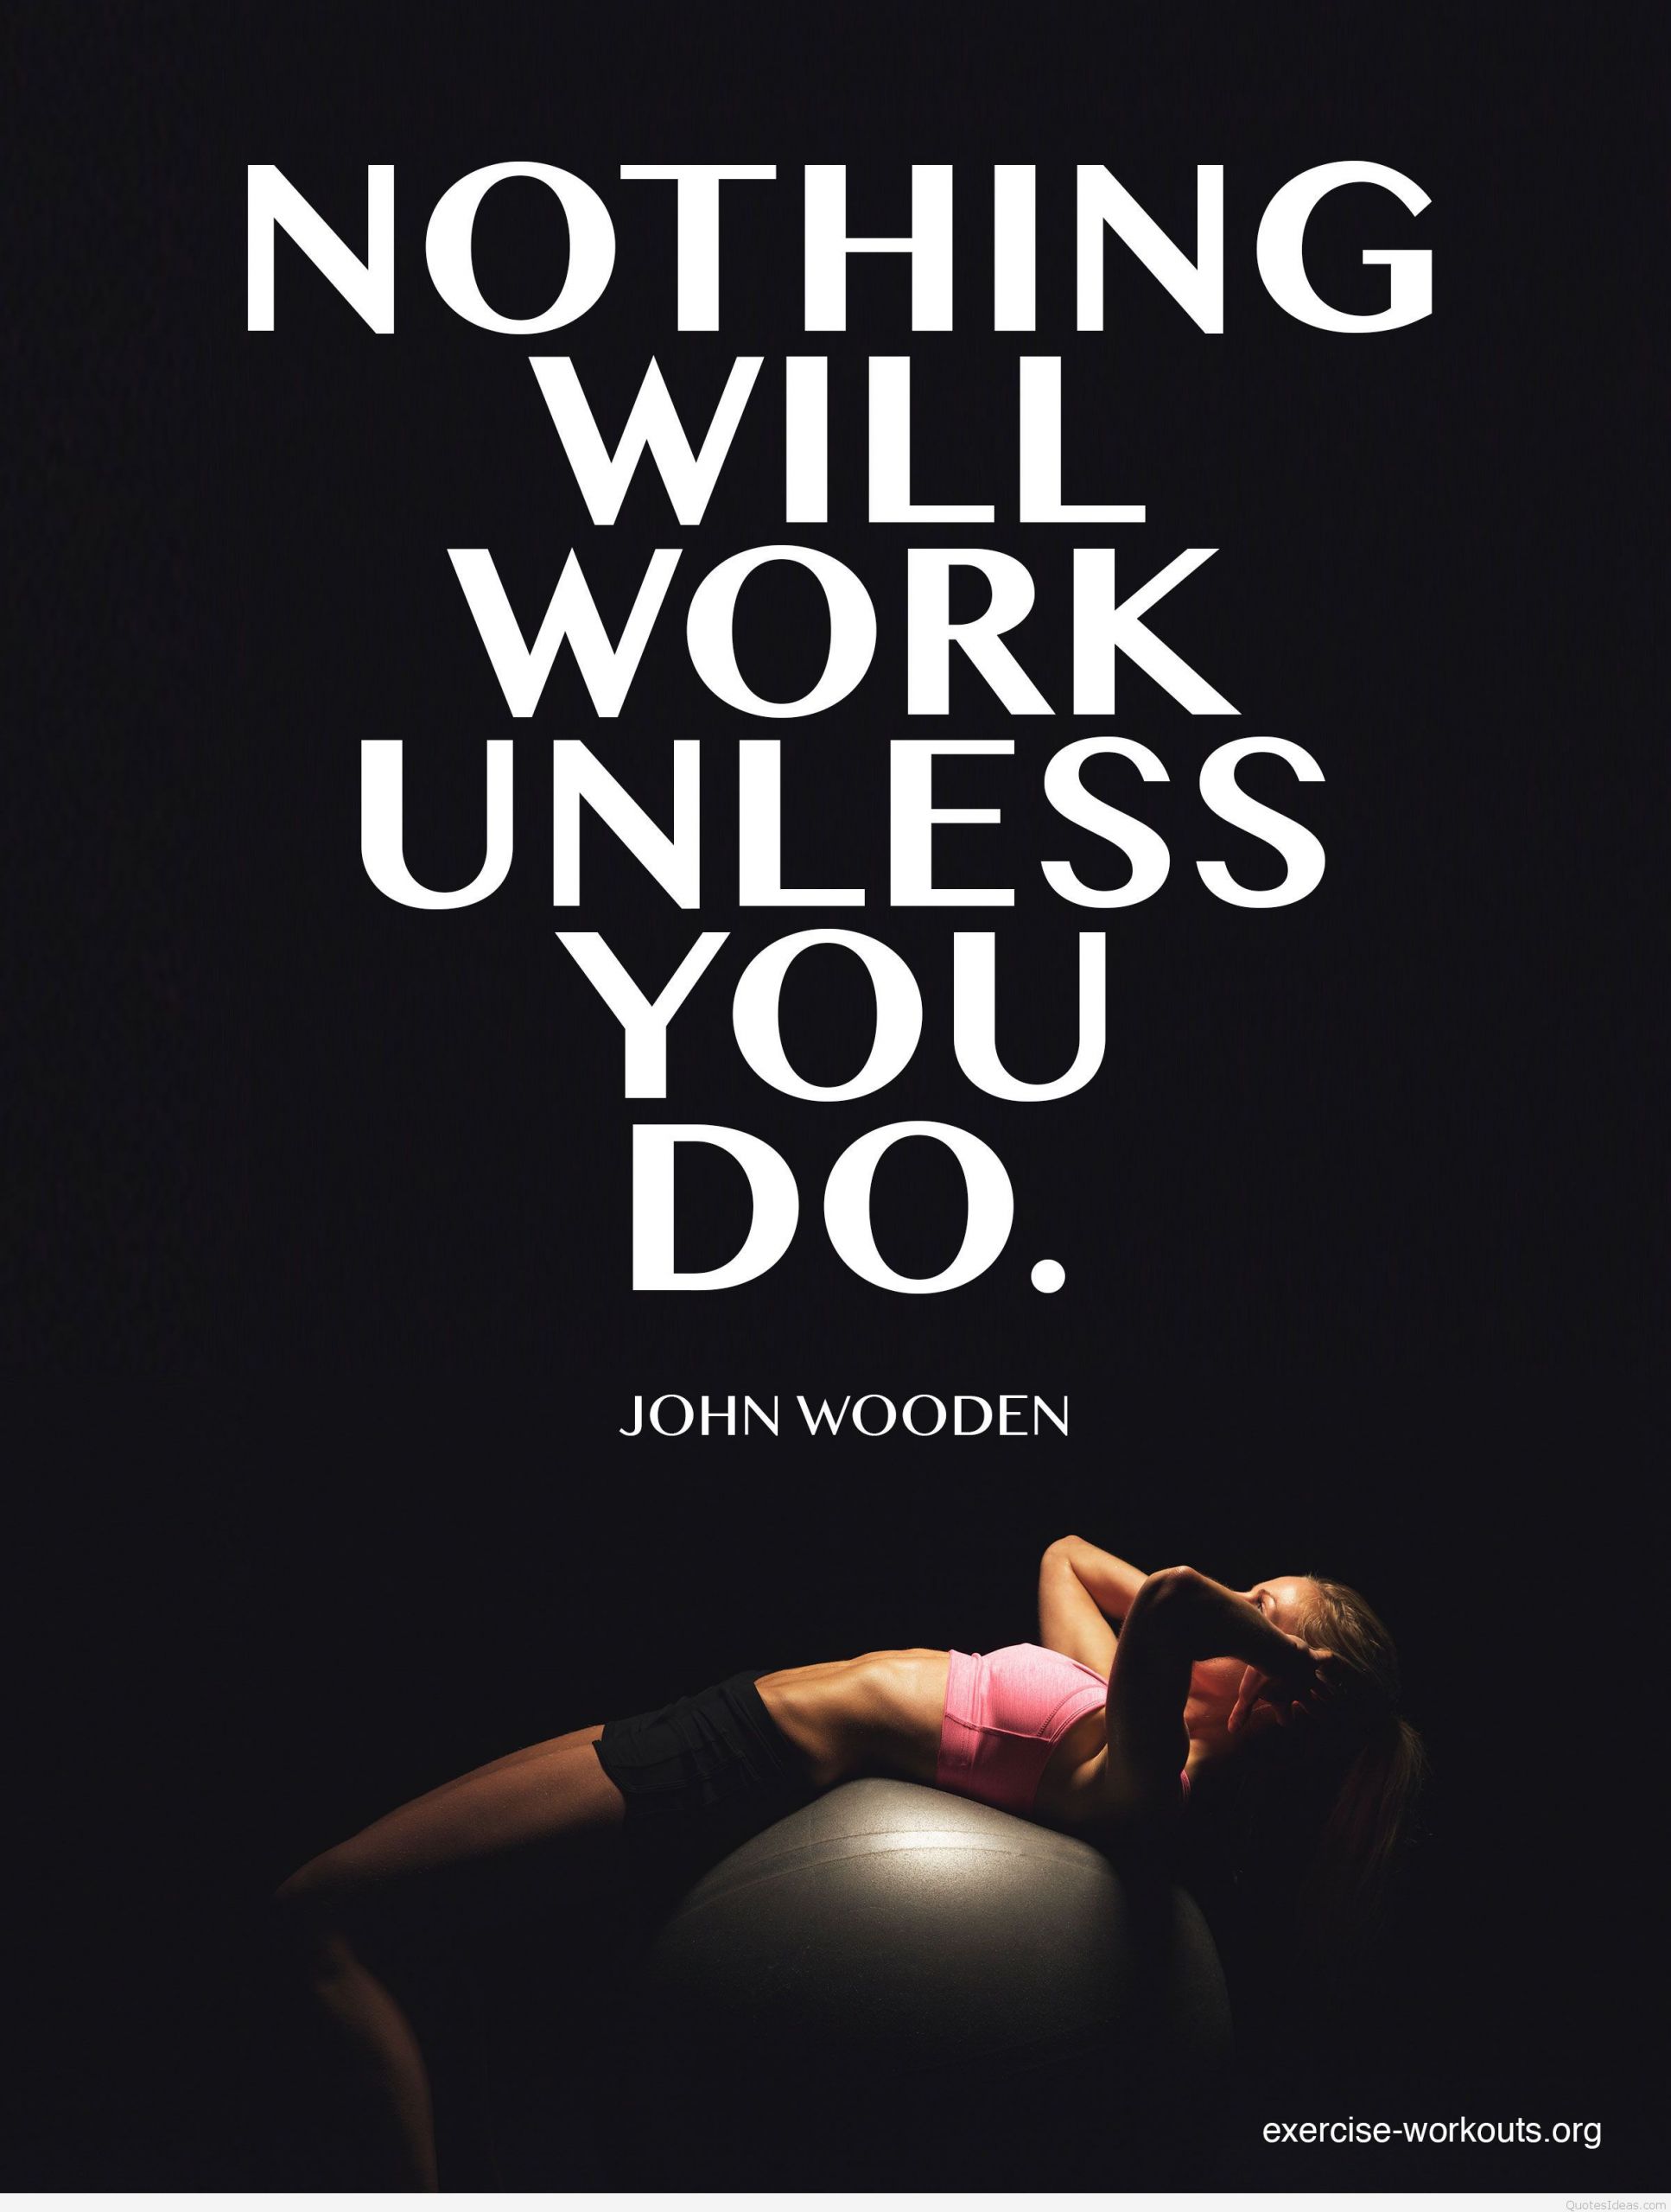 Motivational Quote For Fitness
 Motivational fitness quotes pictures and sayings